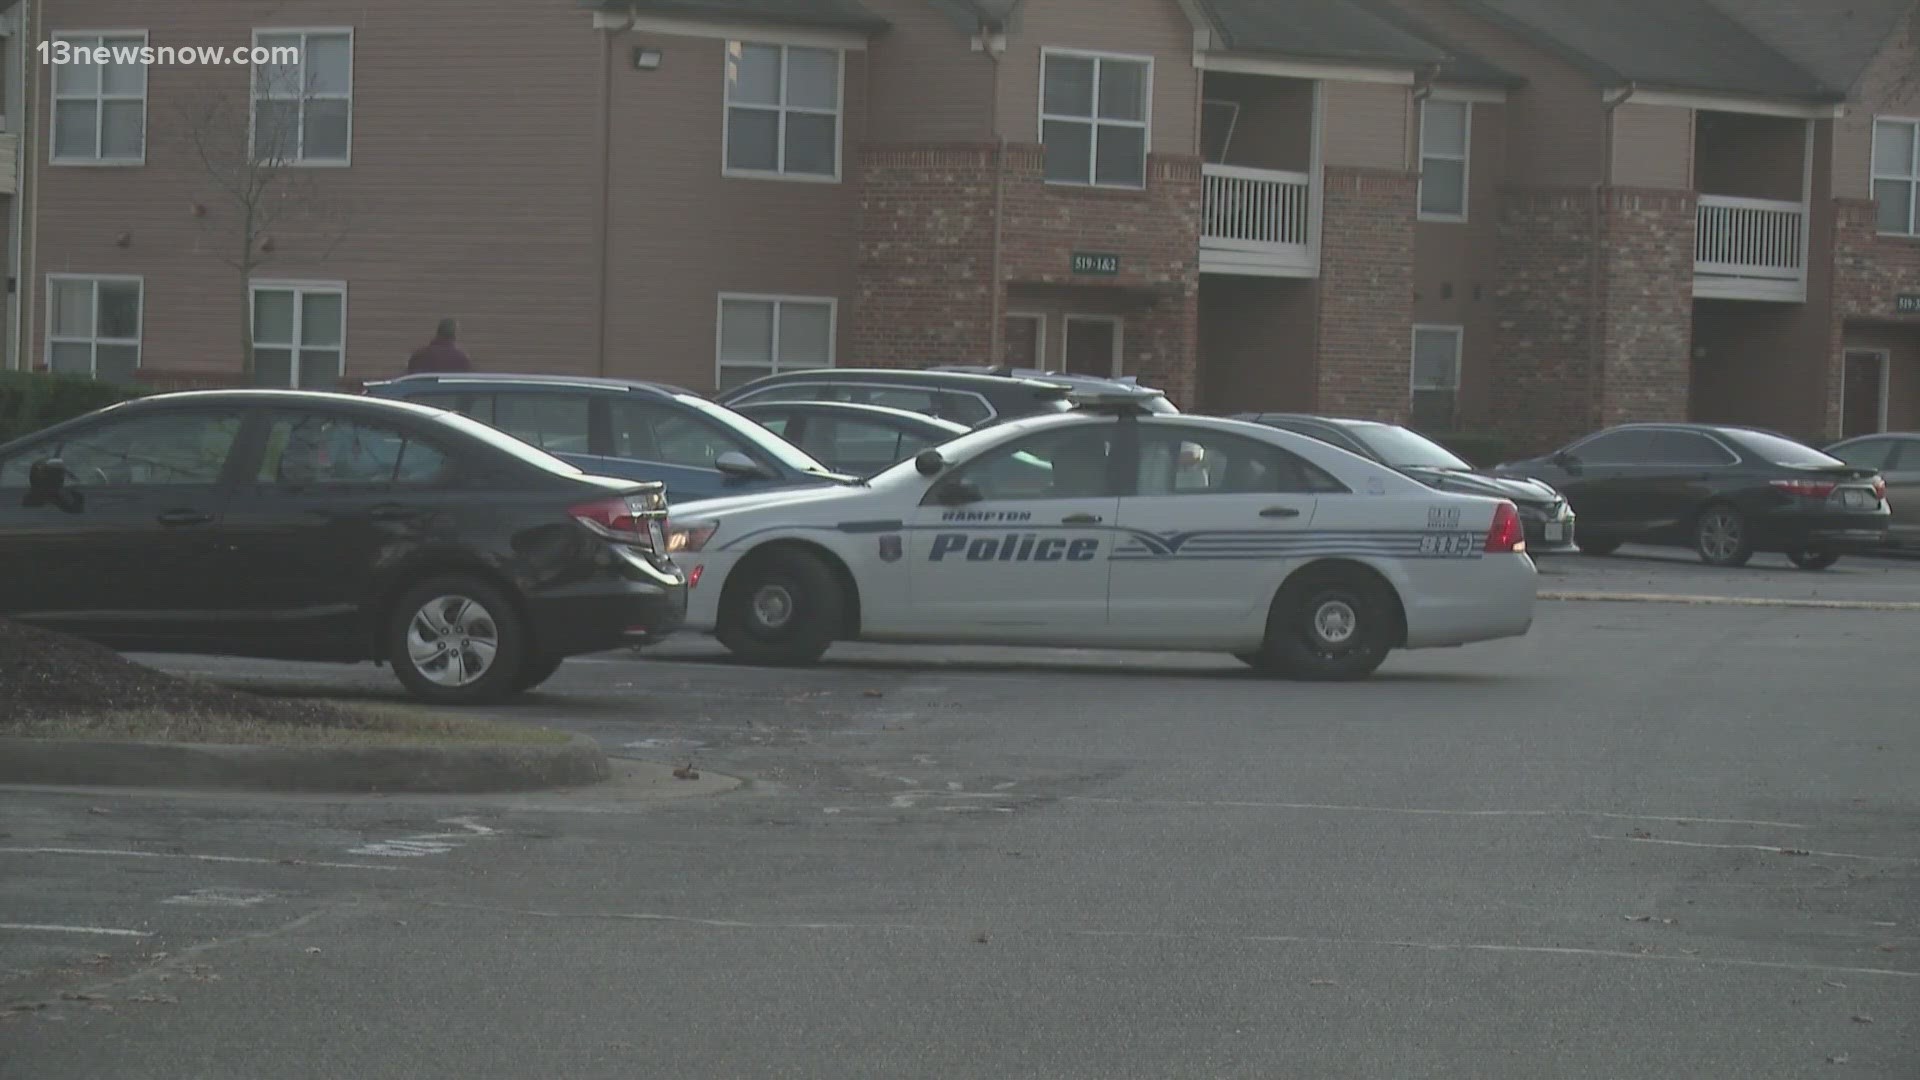 Officers say the toddler got hold of a loaded gun and shot herself this afternoon.